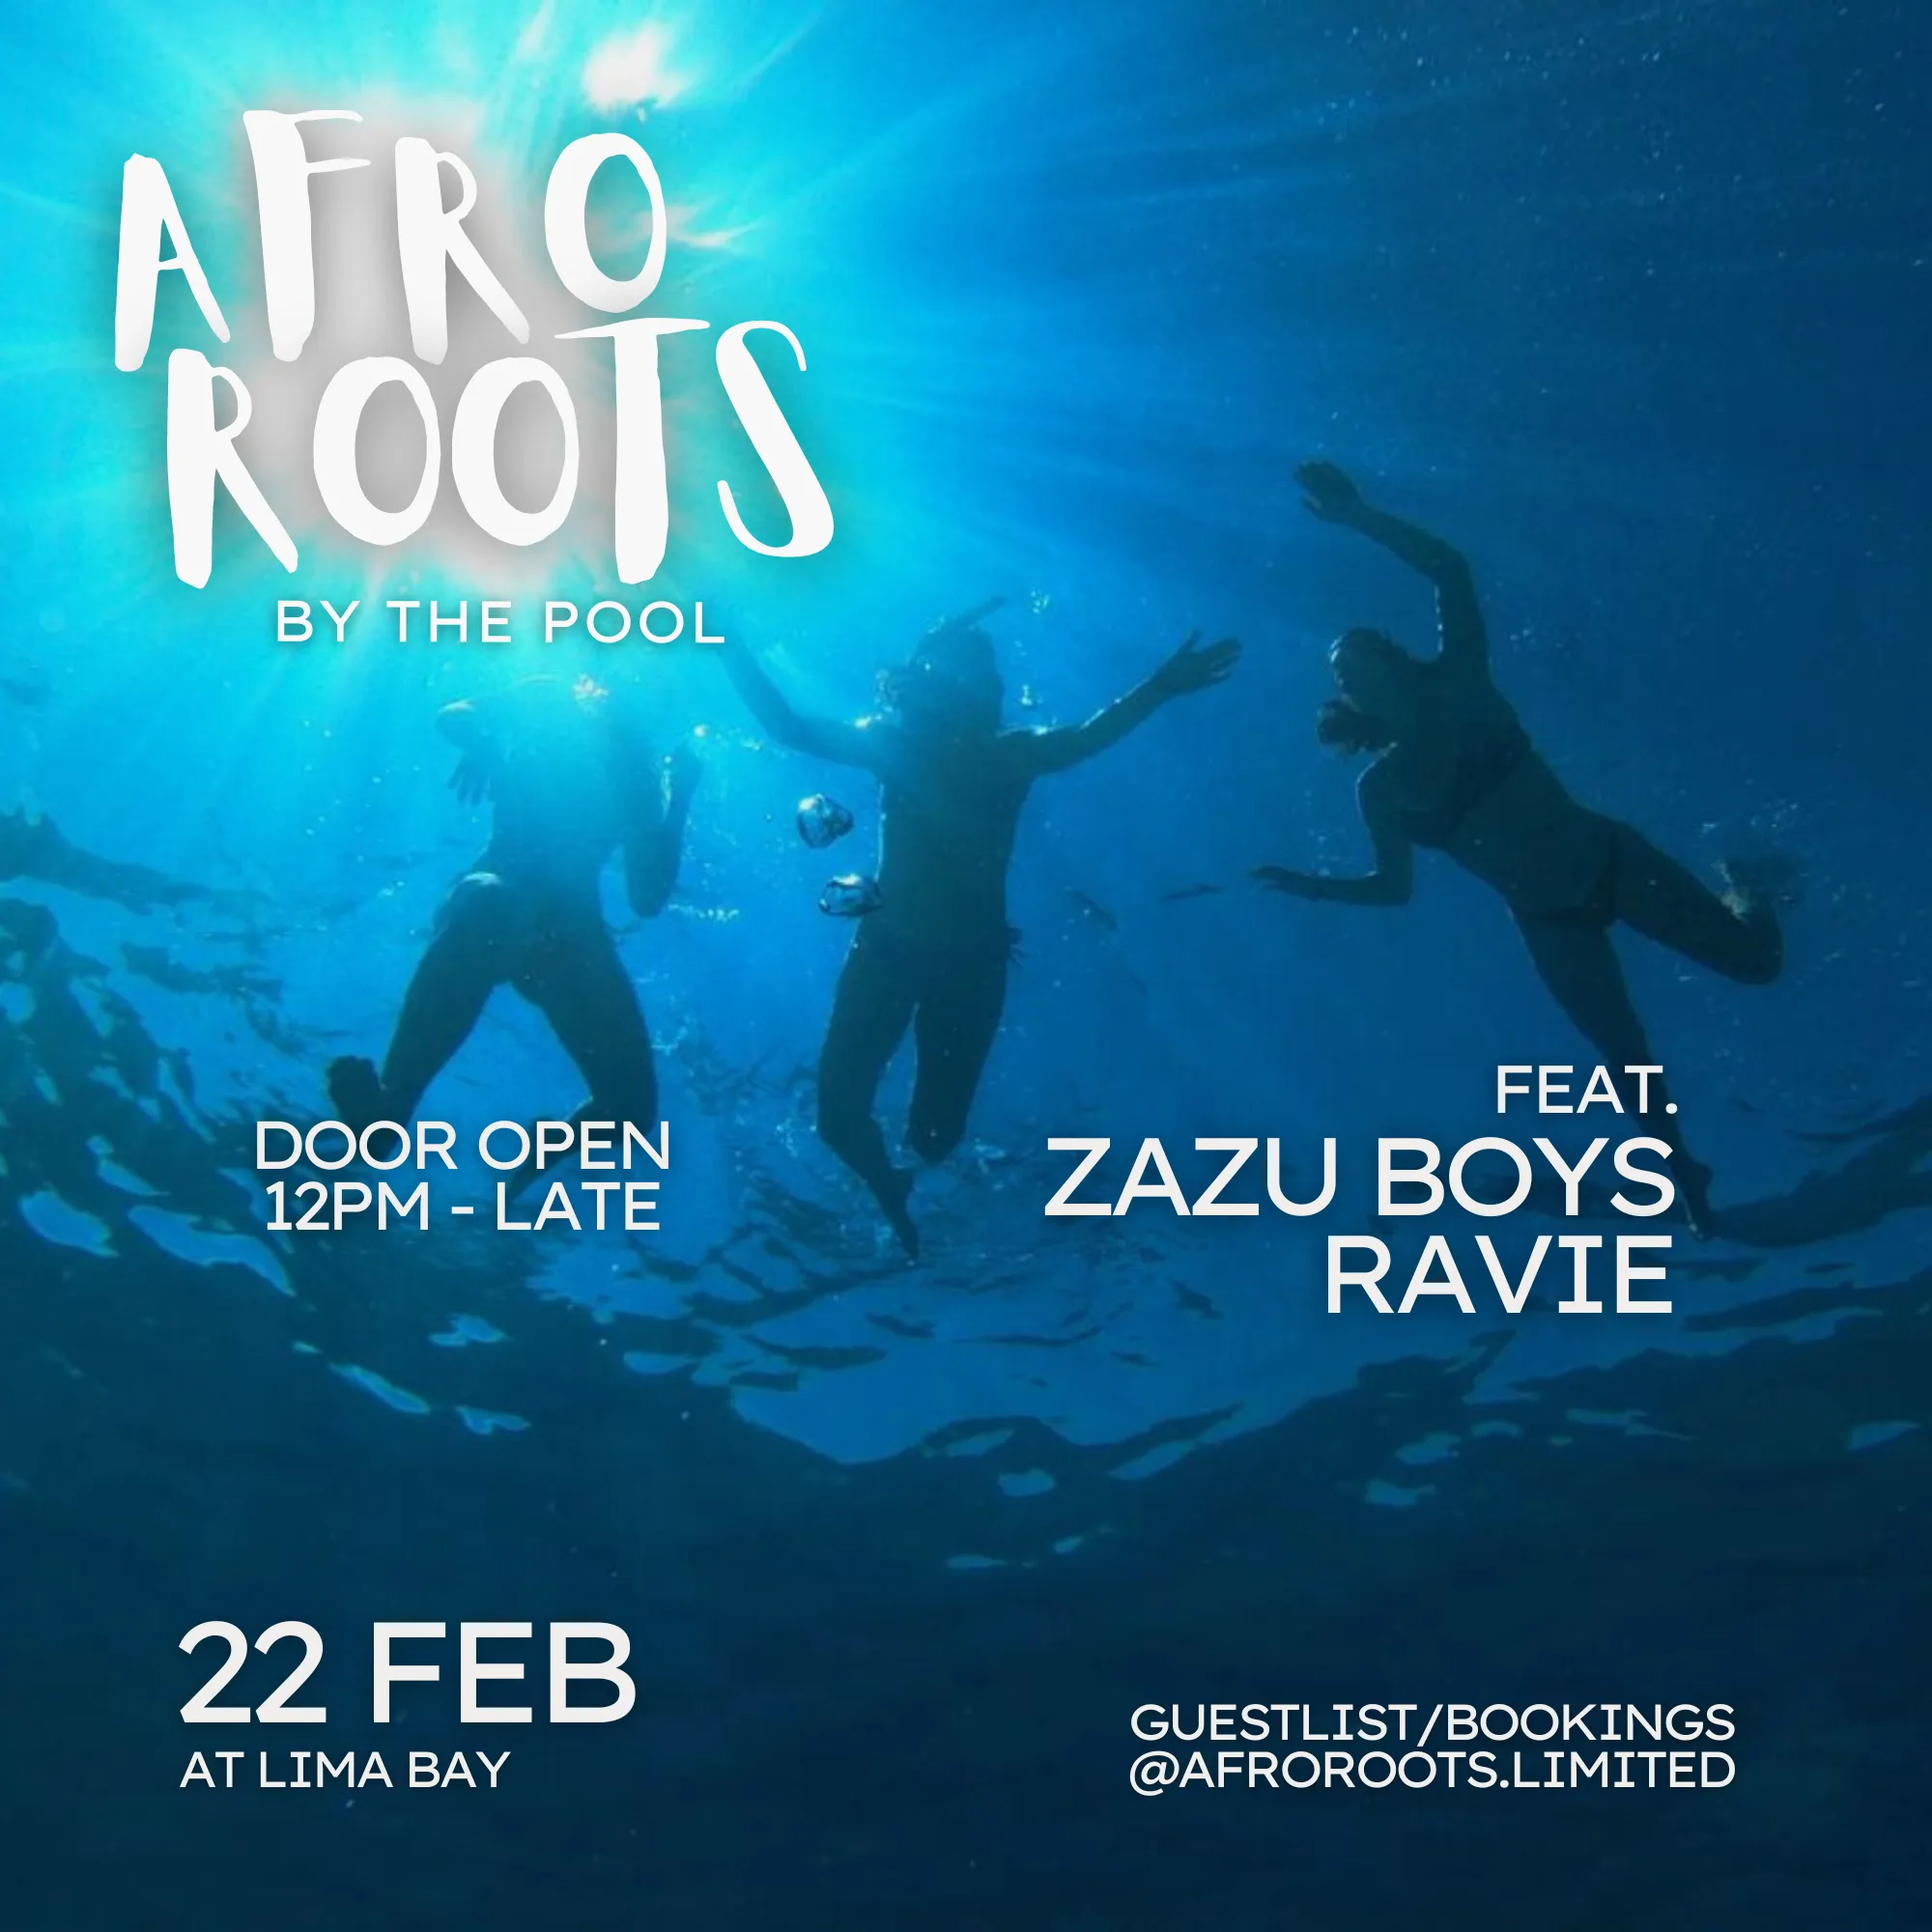 Party Afro Roots by The Pool 11017